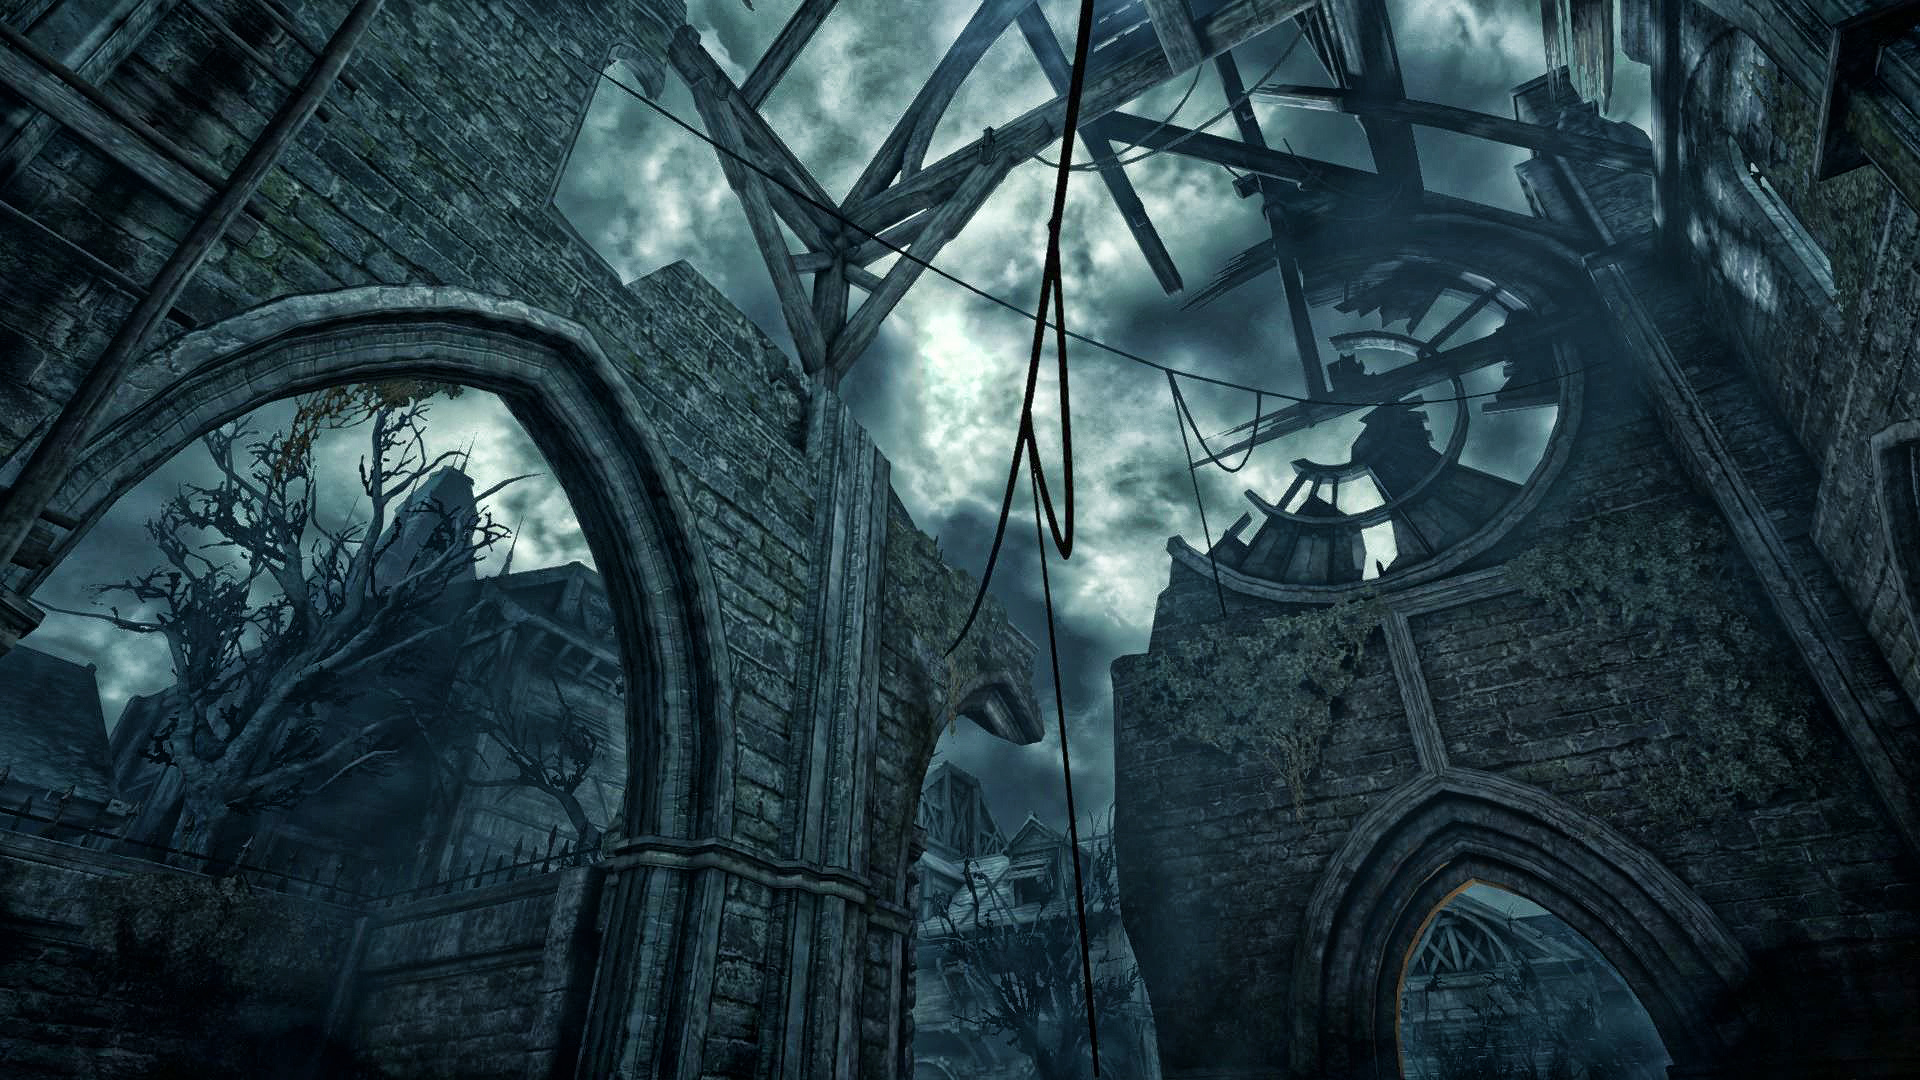 Gothic Art: Monochromatic, Thief, A 2014 stealth video game developed by Eidos-Montreal. 1920x1080 Full HD Wallpaper.